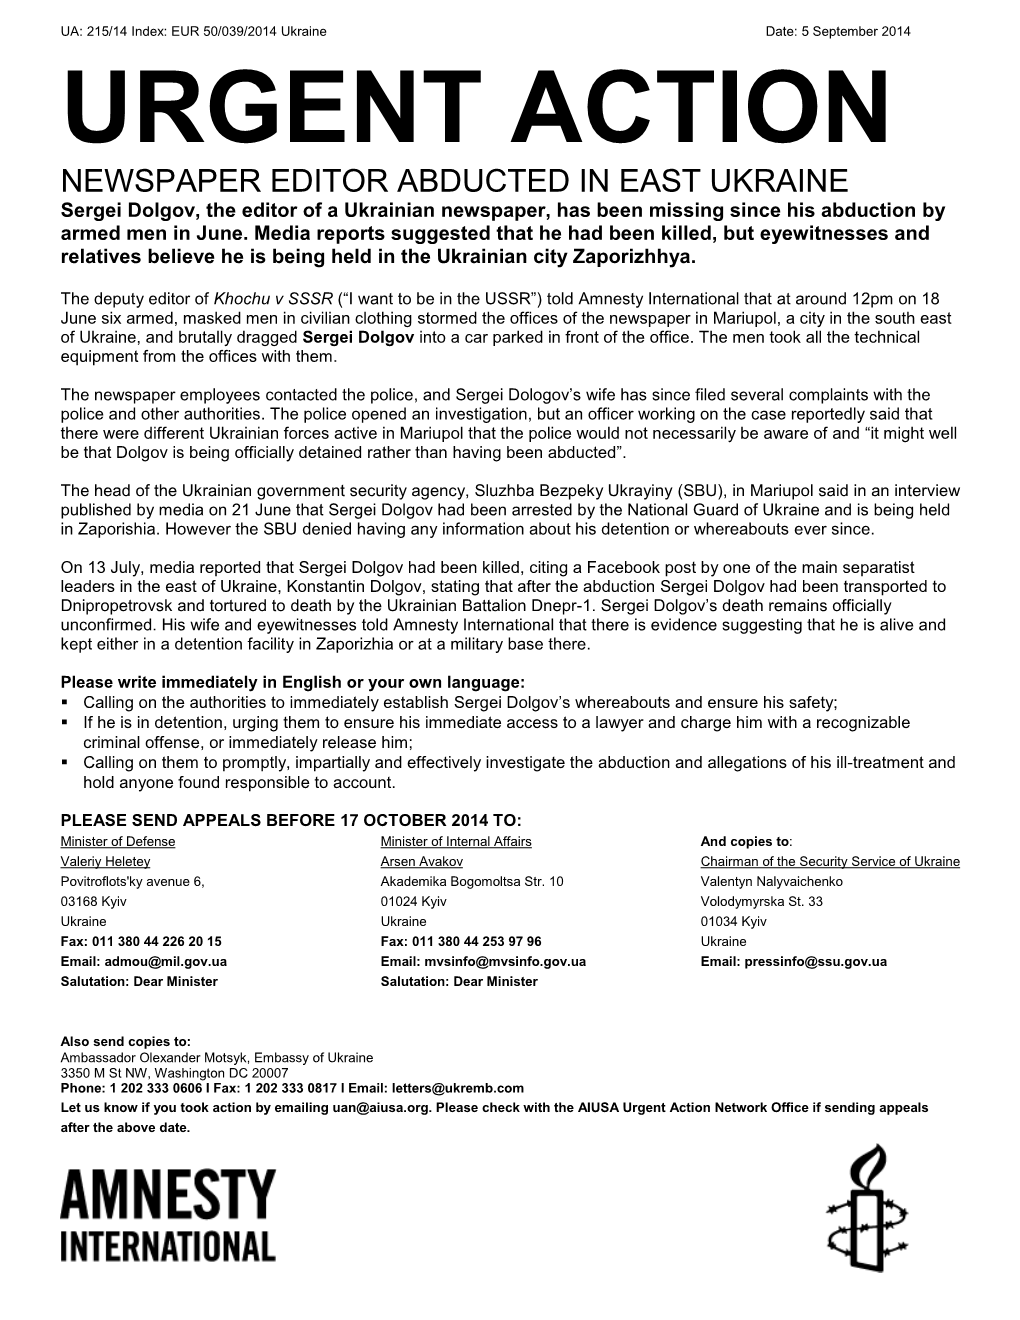 URGENT ACTION NEWSPAPER EDITOR ABDUCTED in EAST UKRAINE Sergei Dolgov, the Editor of a Ukrainian Newspaper, Has Been Missing Since His Abduction by Armed Men in June